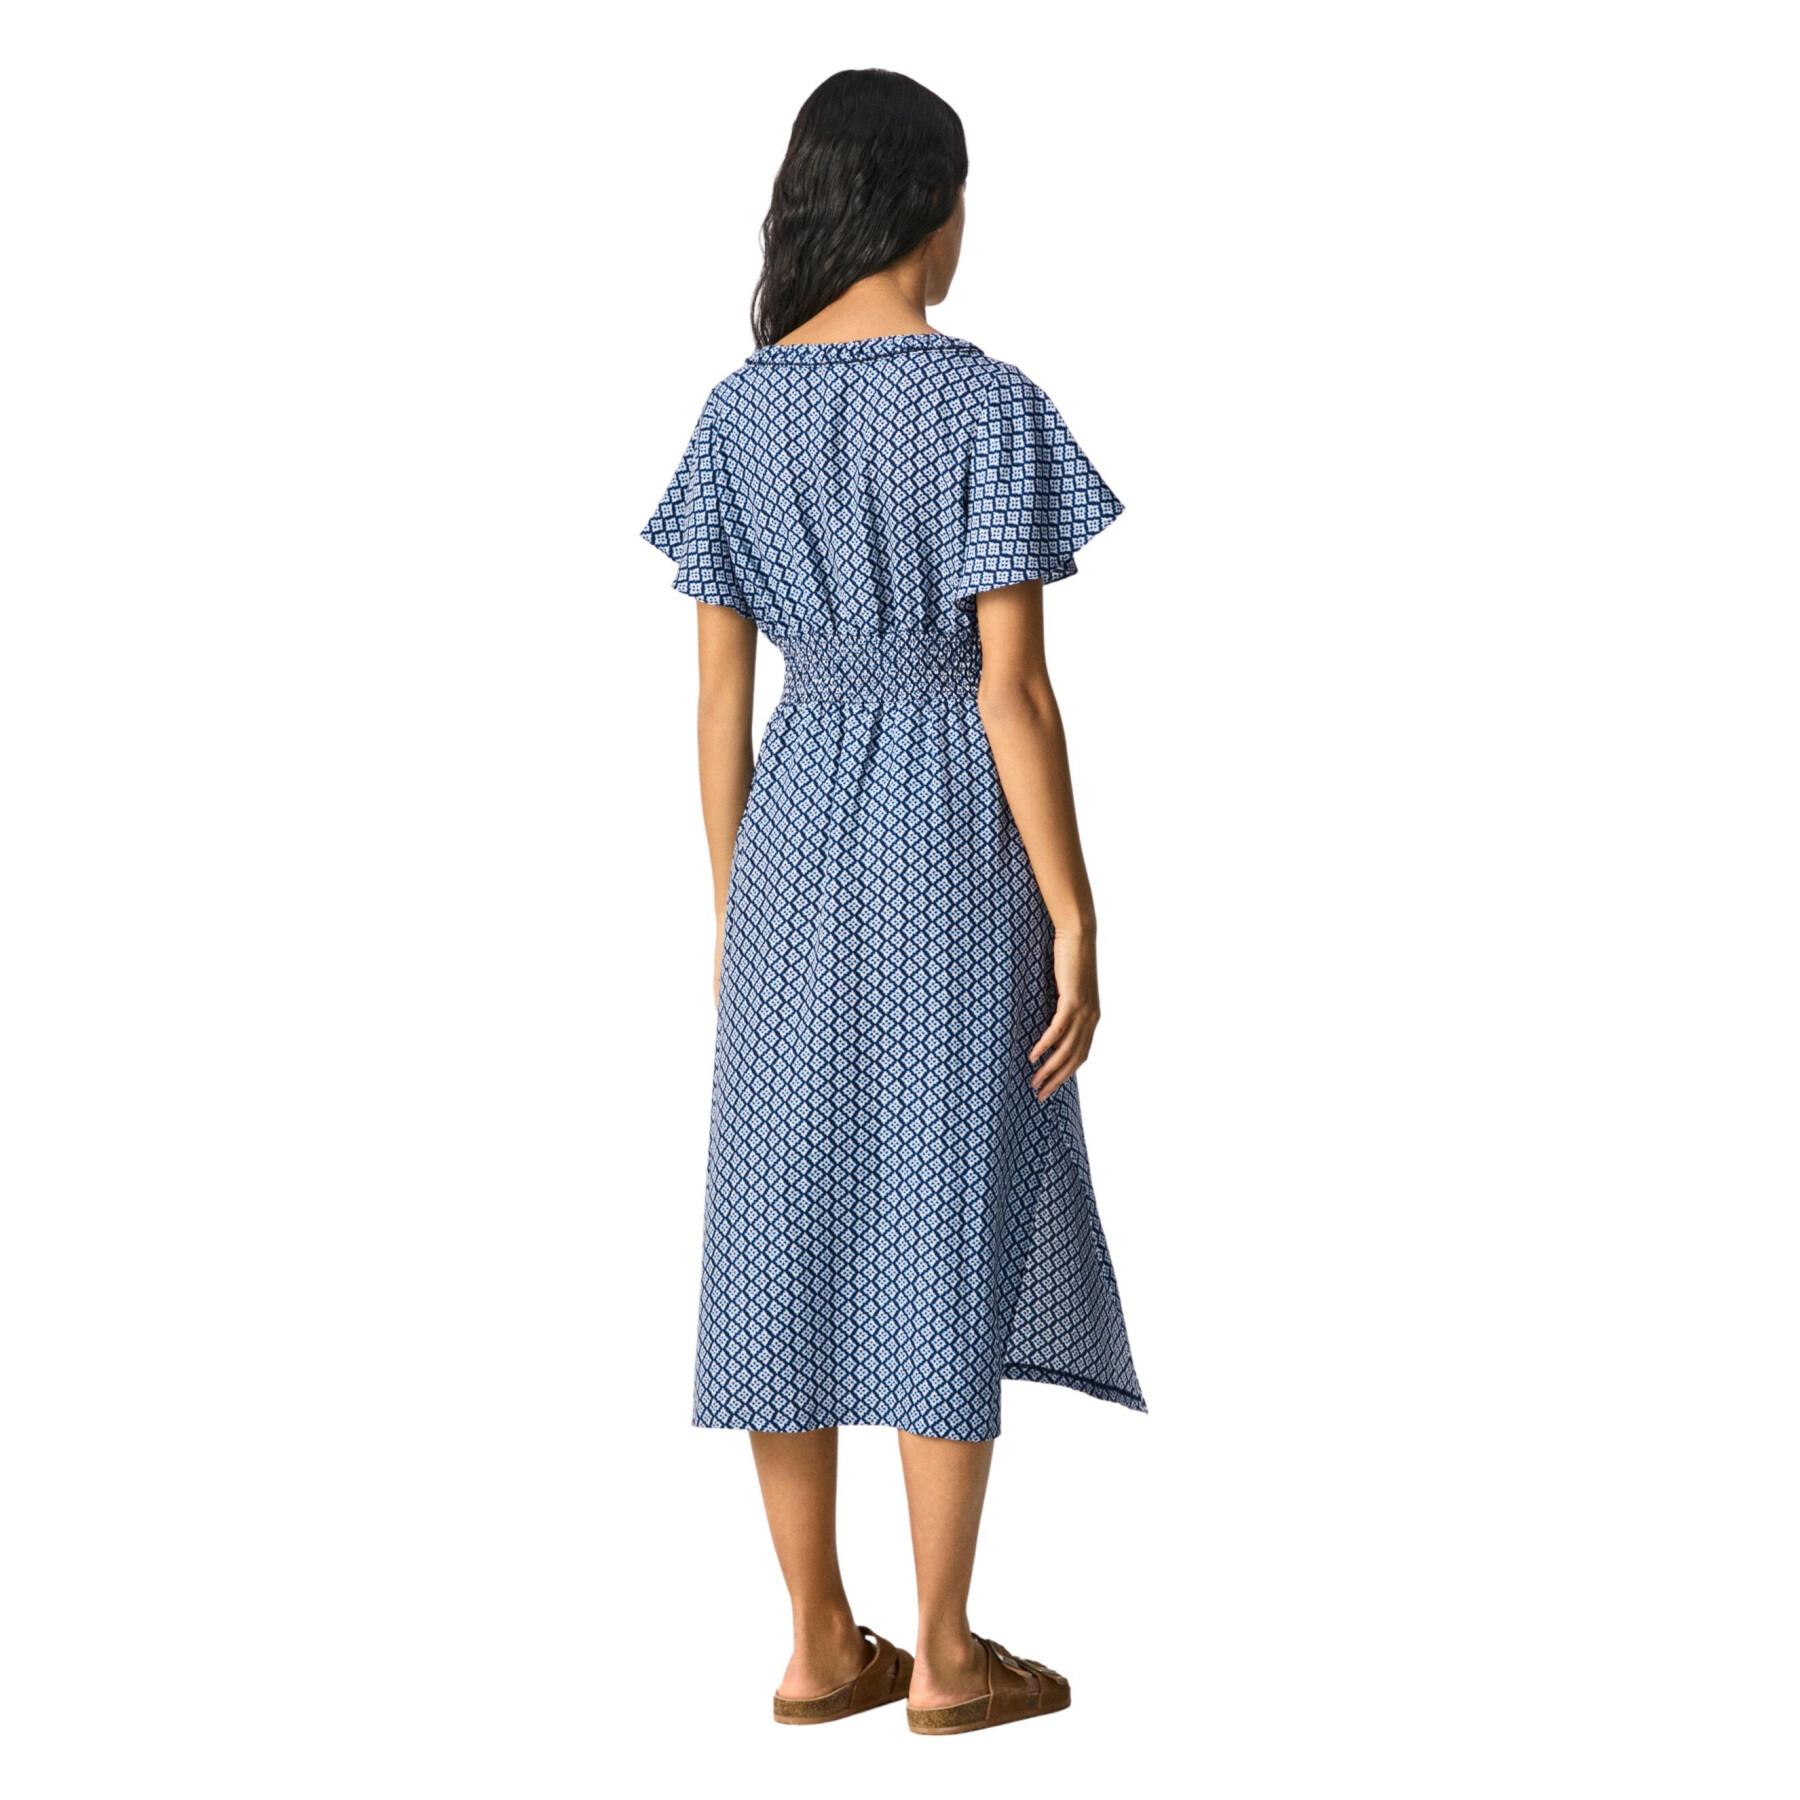 Women's dress Pepe Jeans Miracle